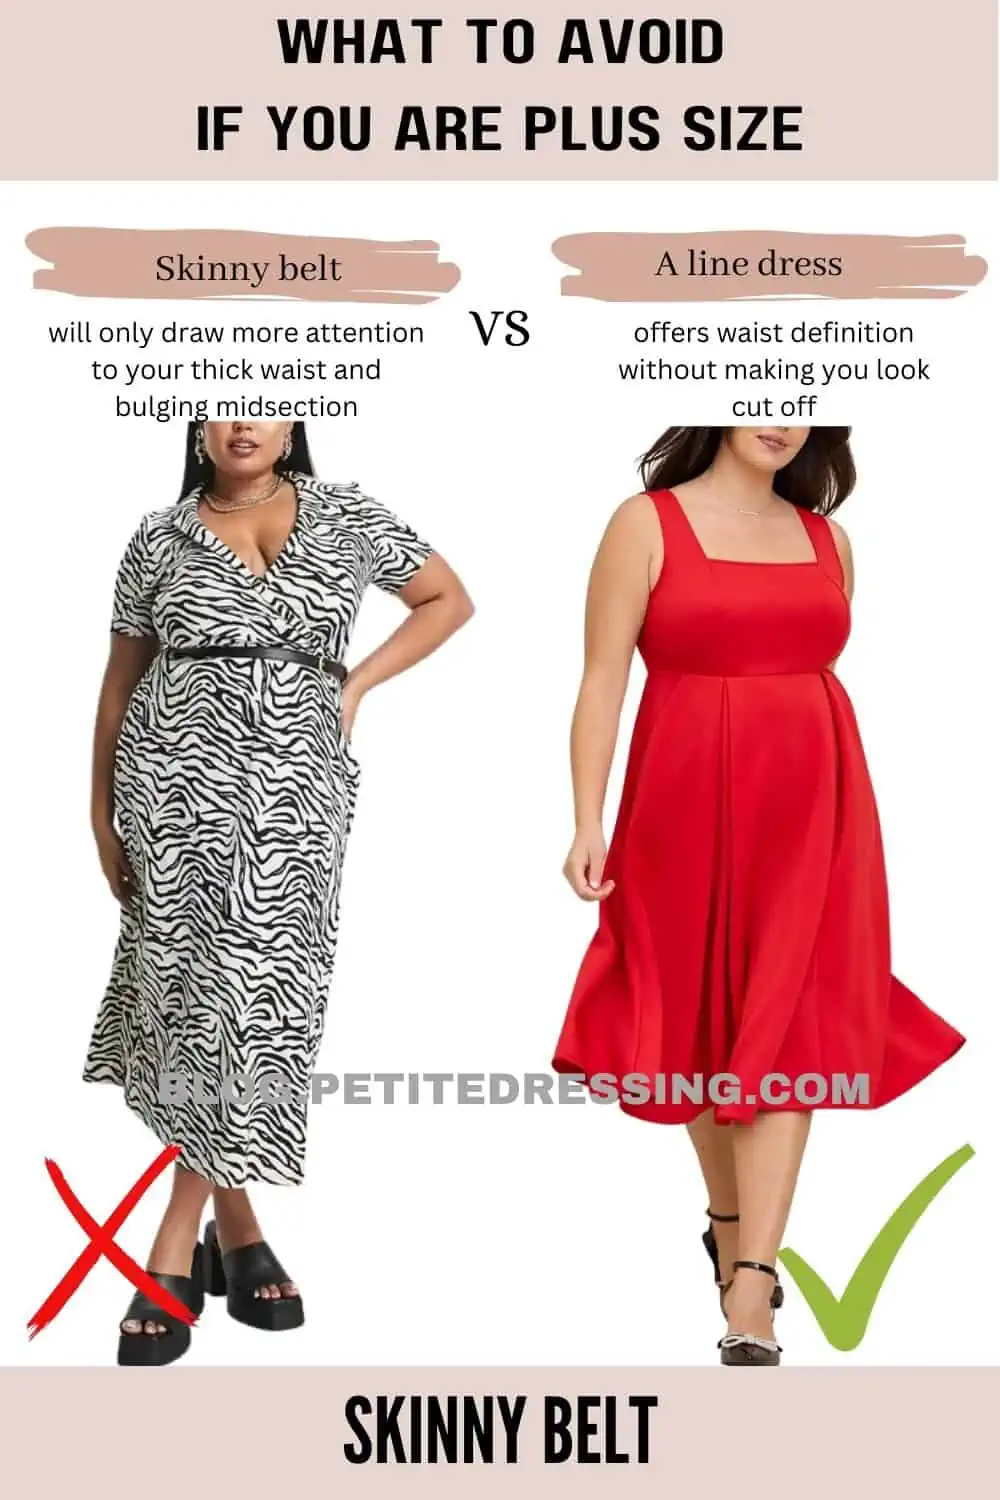 This is ridiculous…ALSO an XXL is NOT plus size nor should it be